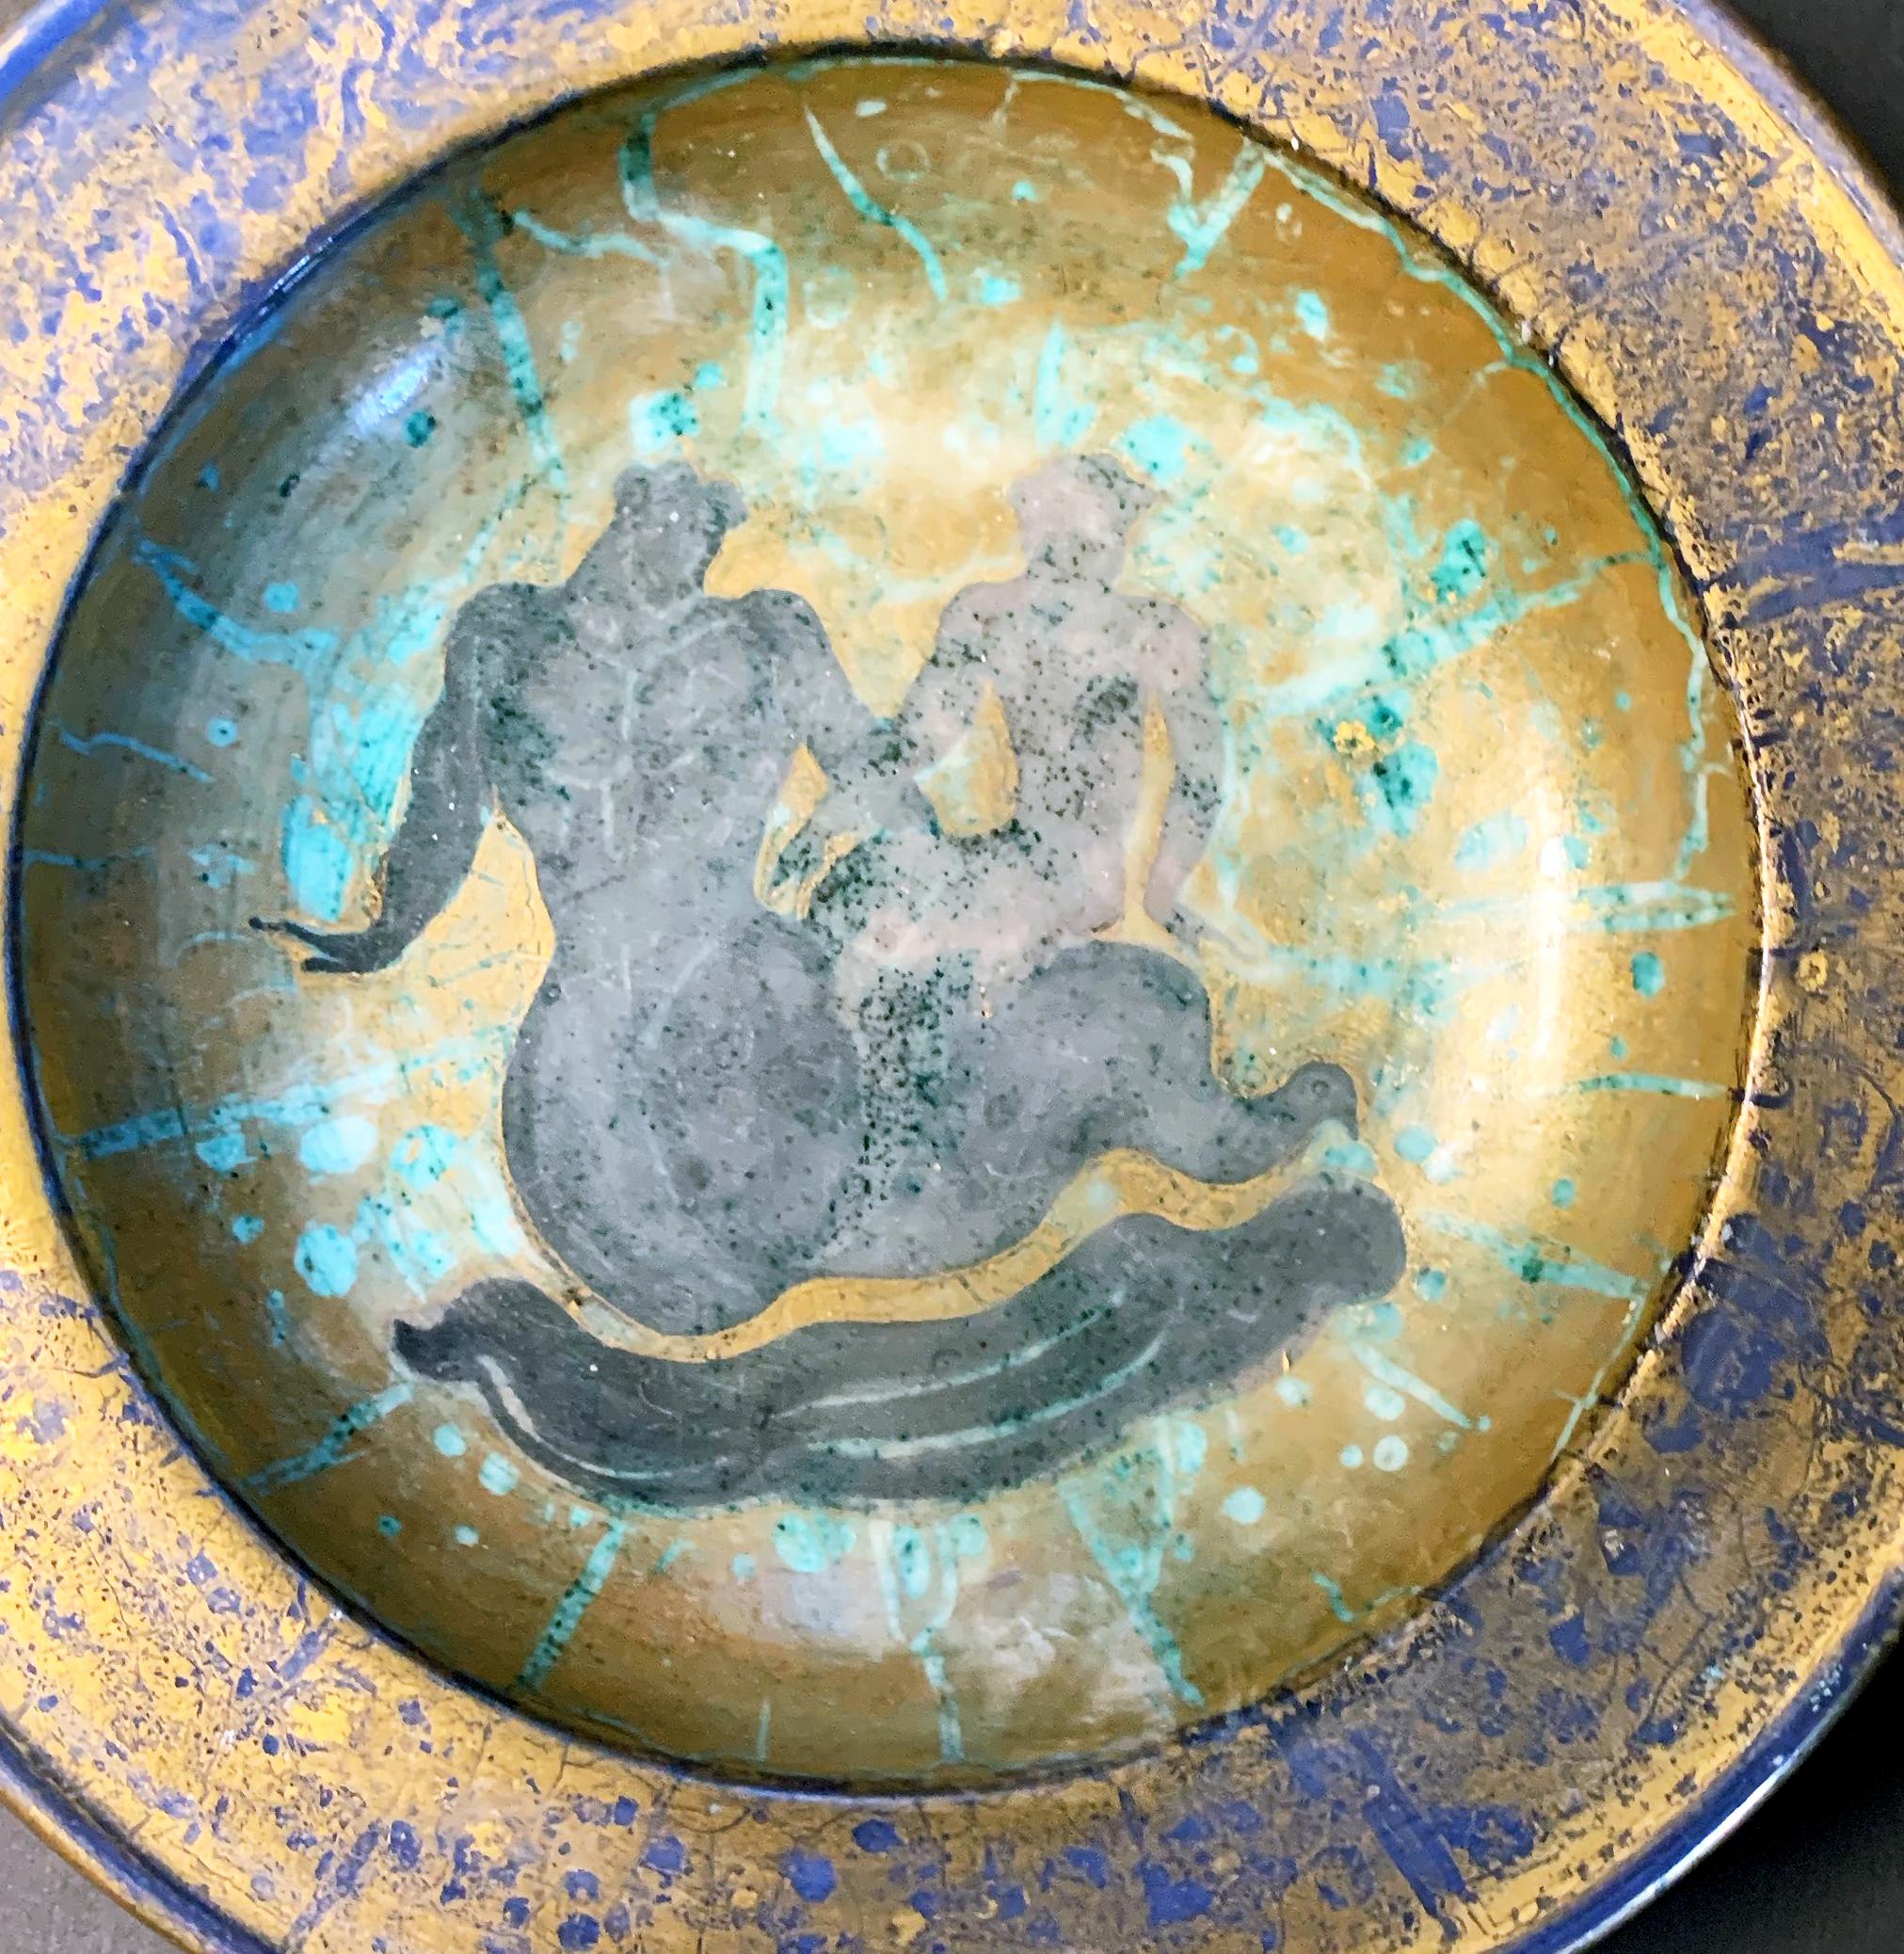 Vividly glazed in tones of jade, cobalt blue, gold and charcoal, this remarkable, high-style Art Deco bowl was created by Jean Mayodon, the great Art Deco sculptor and ceramicist. The bowl depicts Neptune and Salacia, gliding along an Art Deco sea,